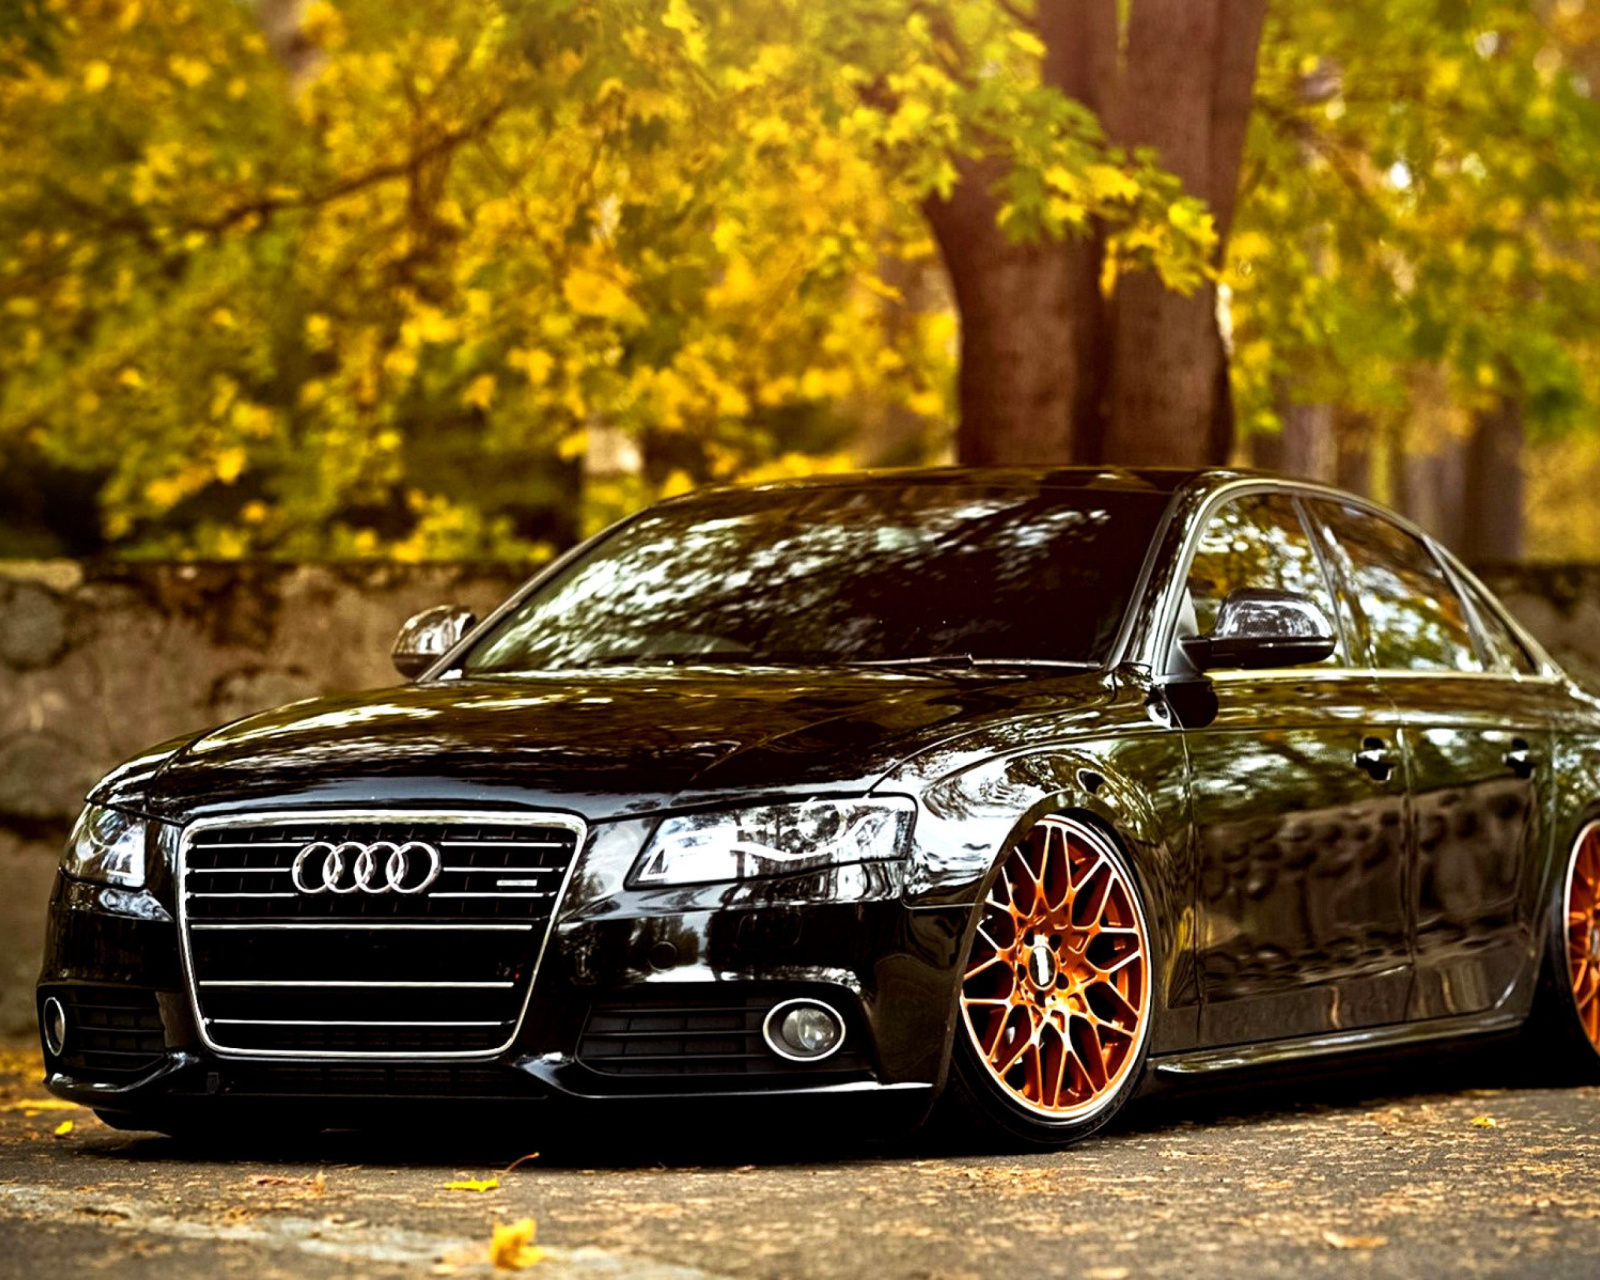 Audi A4 with New Rims wallpaper 1600x1280